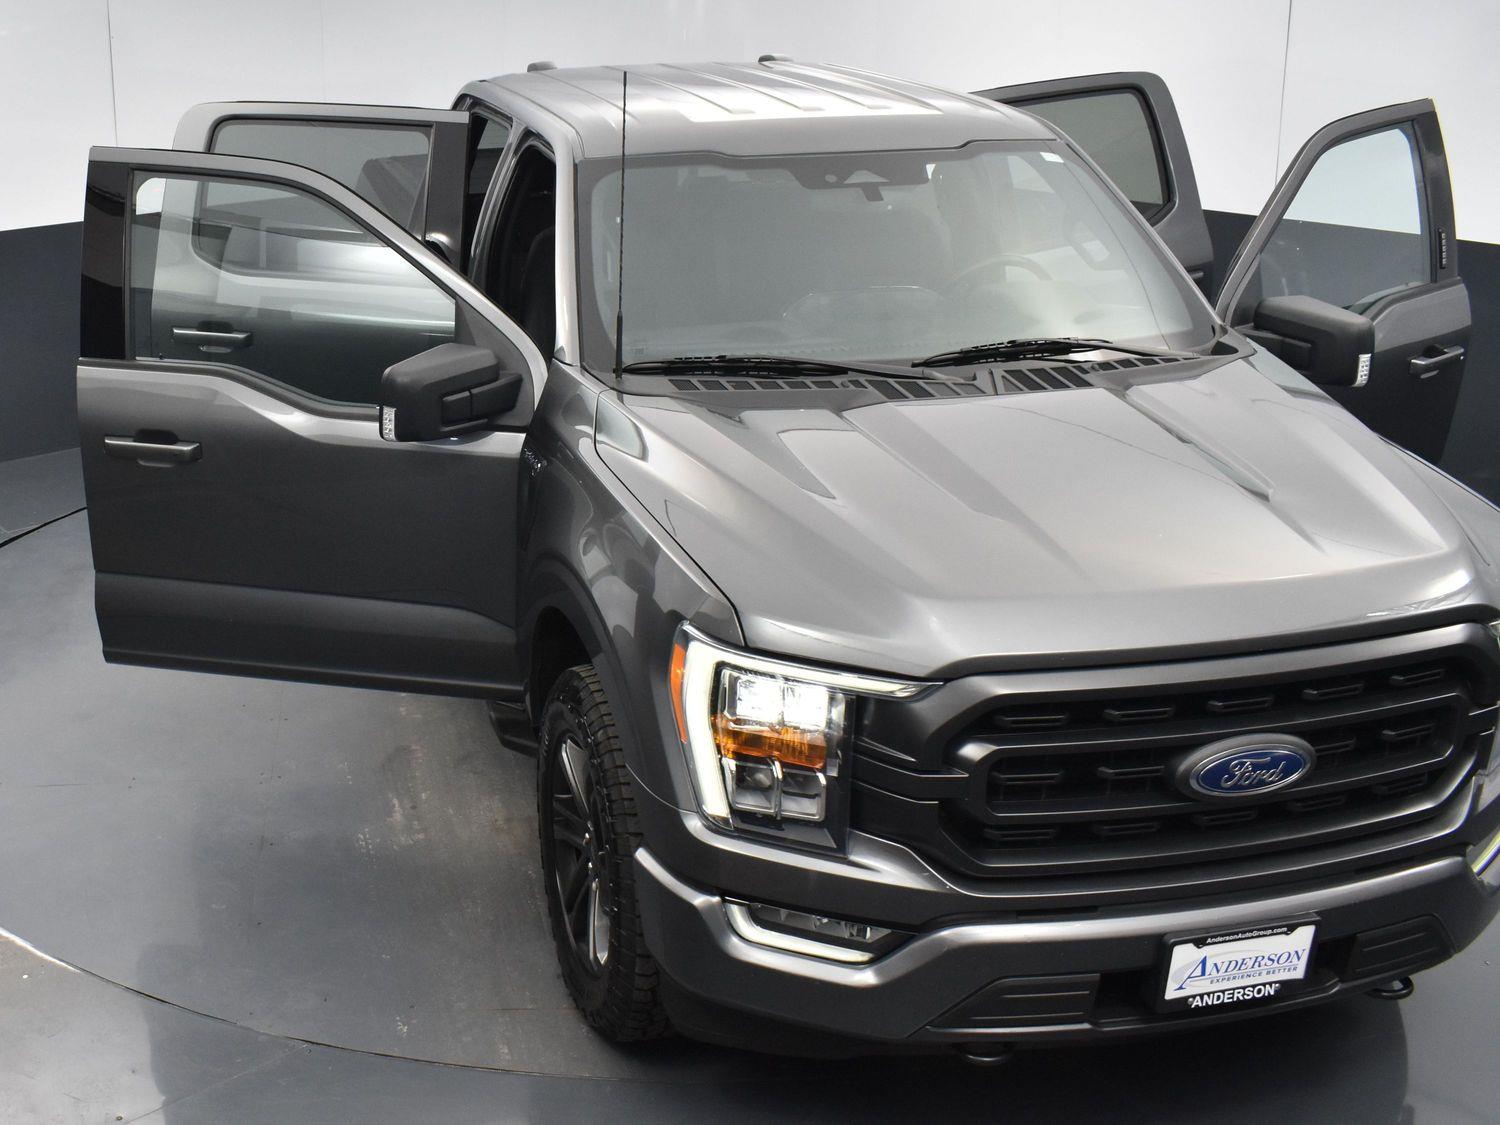 Used 2021 Ford F-150 XLT Crew Cab Truck for sale in Grand Island NE